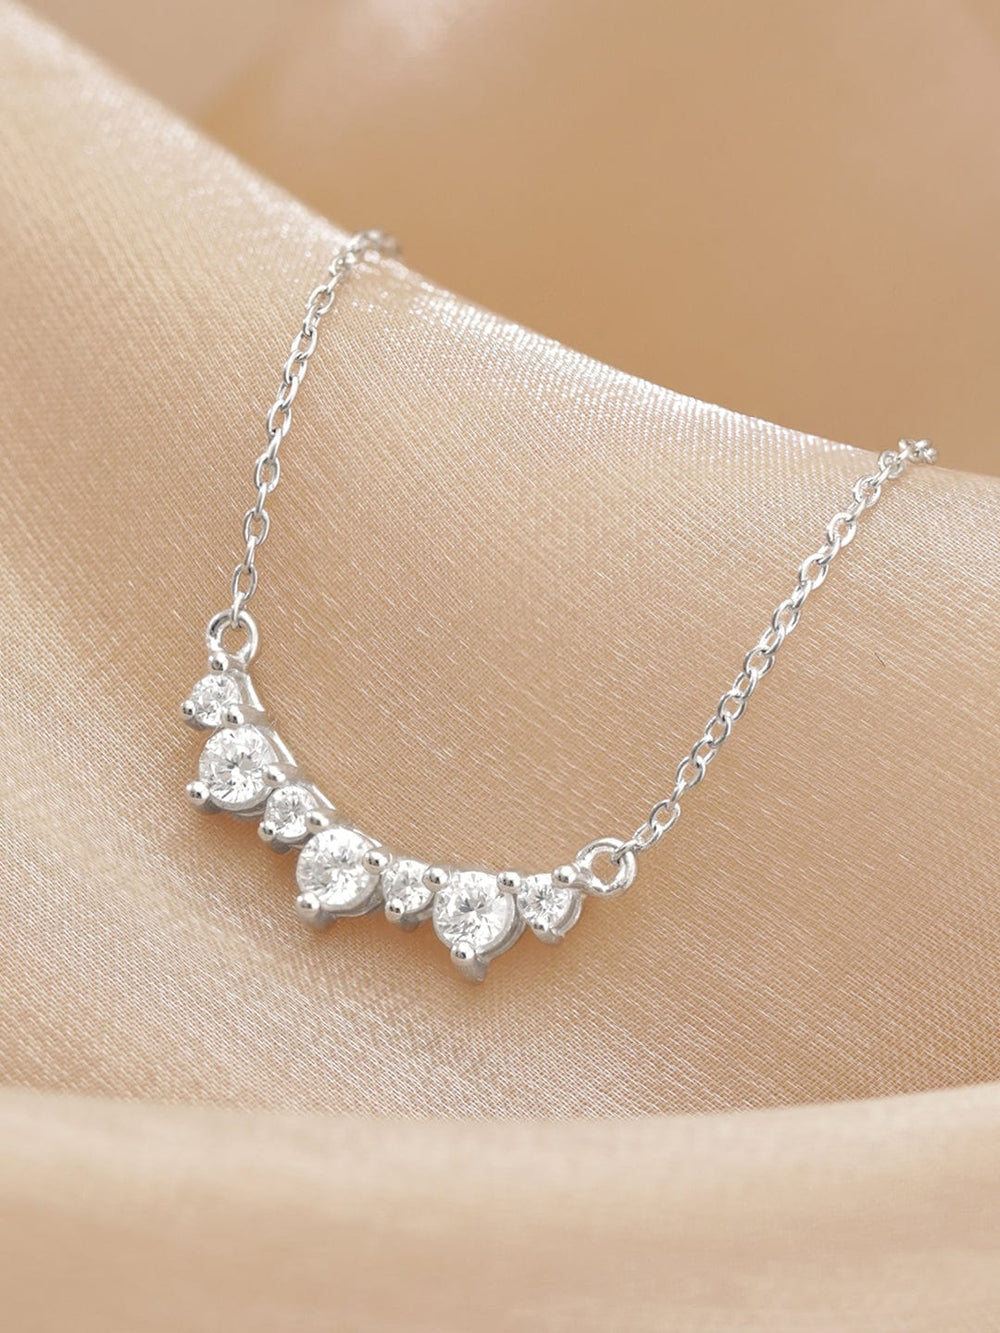 Rubans Silver 925 Sterling Silver Rhodium-Plated Chain Necklace